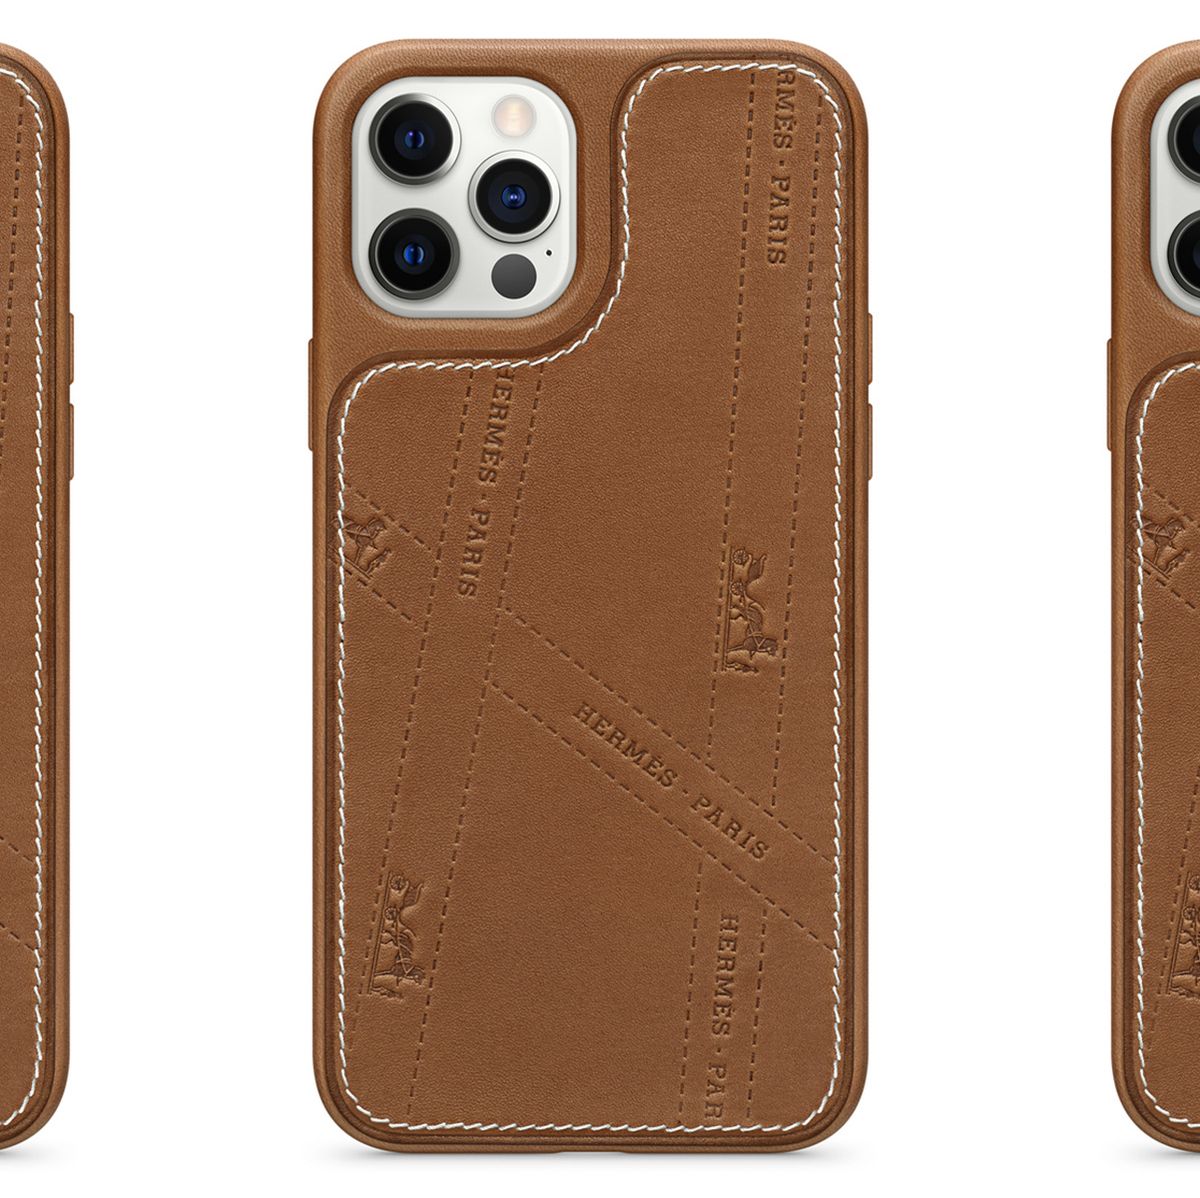 Hermes iPhone Case by Wheel of Fortune